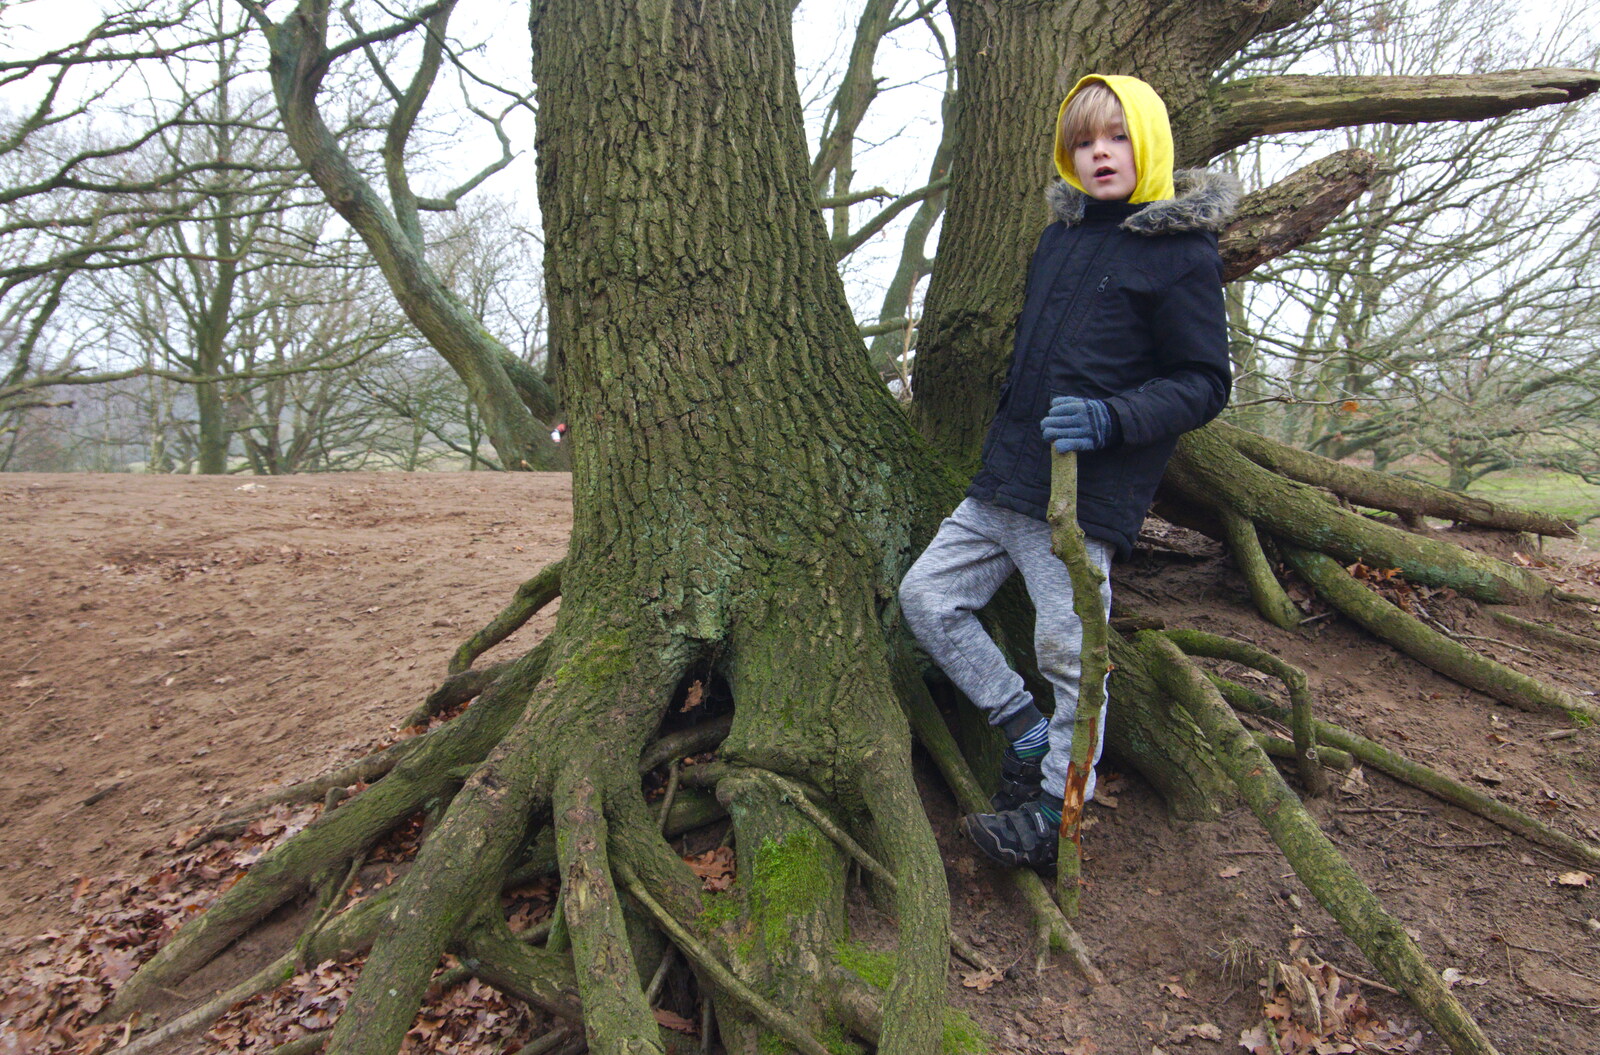 Harry observes from his tree-root base from New Year's Day on the Ling, Wortham, Suffolk - 1st January 2020